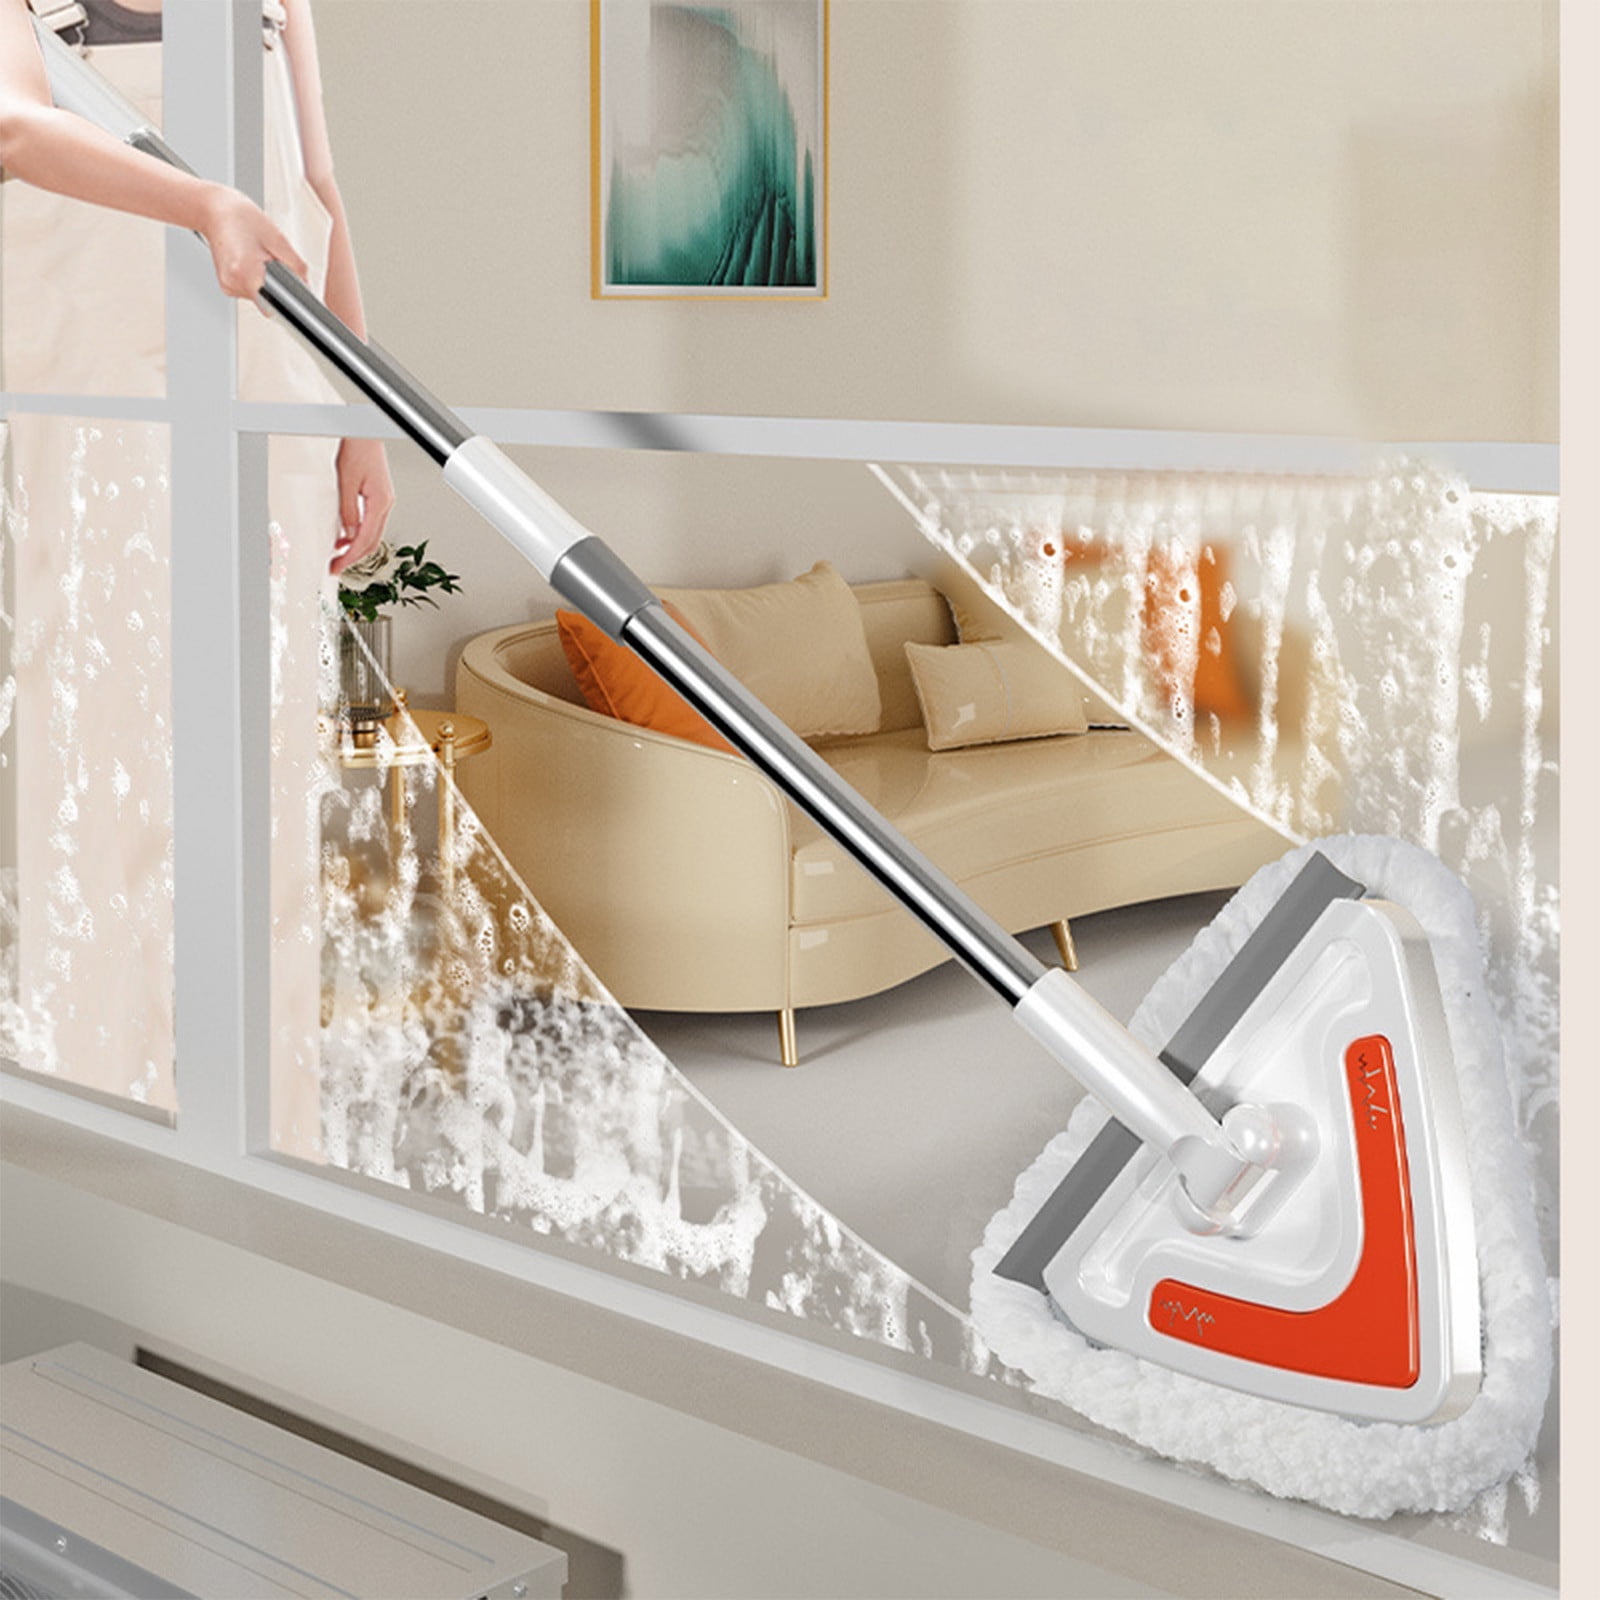 SDJMa Wall Cleaner with Long Handle - 59in Ceiling Mop Wall and Baseboard  Cleaning Tools, Triangle Rotatable Adjustable Wall Duster Scrubber for